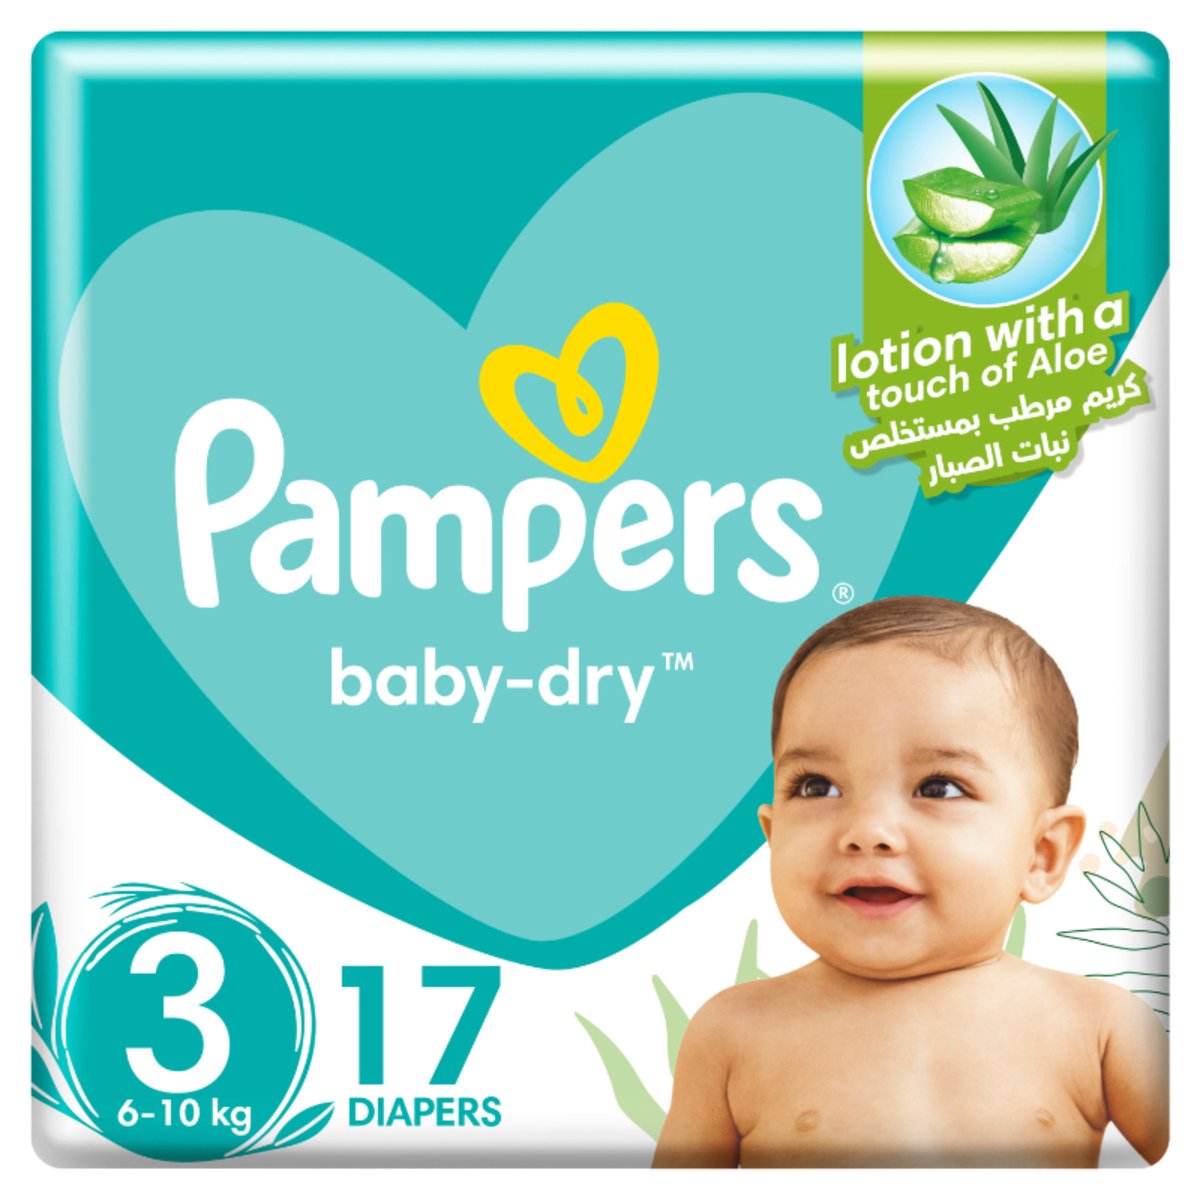 Pampers Baby-Dry Taped Diapers with Aloe Vera Lotion, up to 100% Leakage Protection, Size 3, 6-10kg, 17 pcs